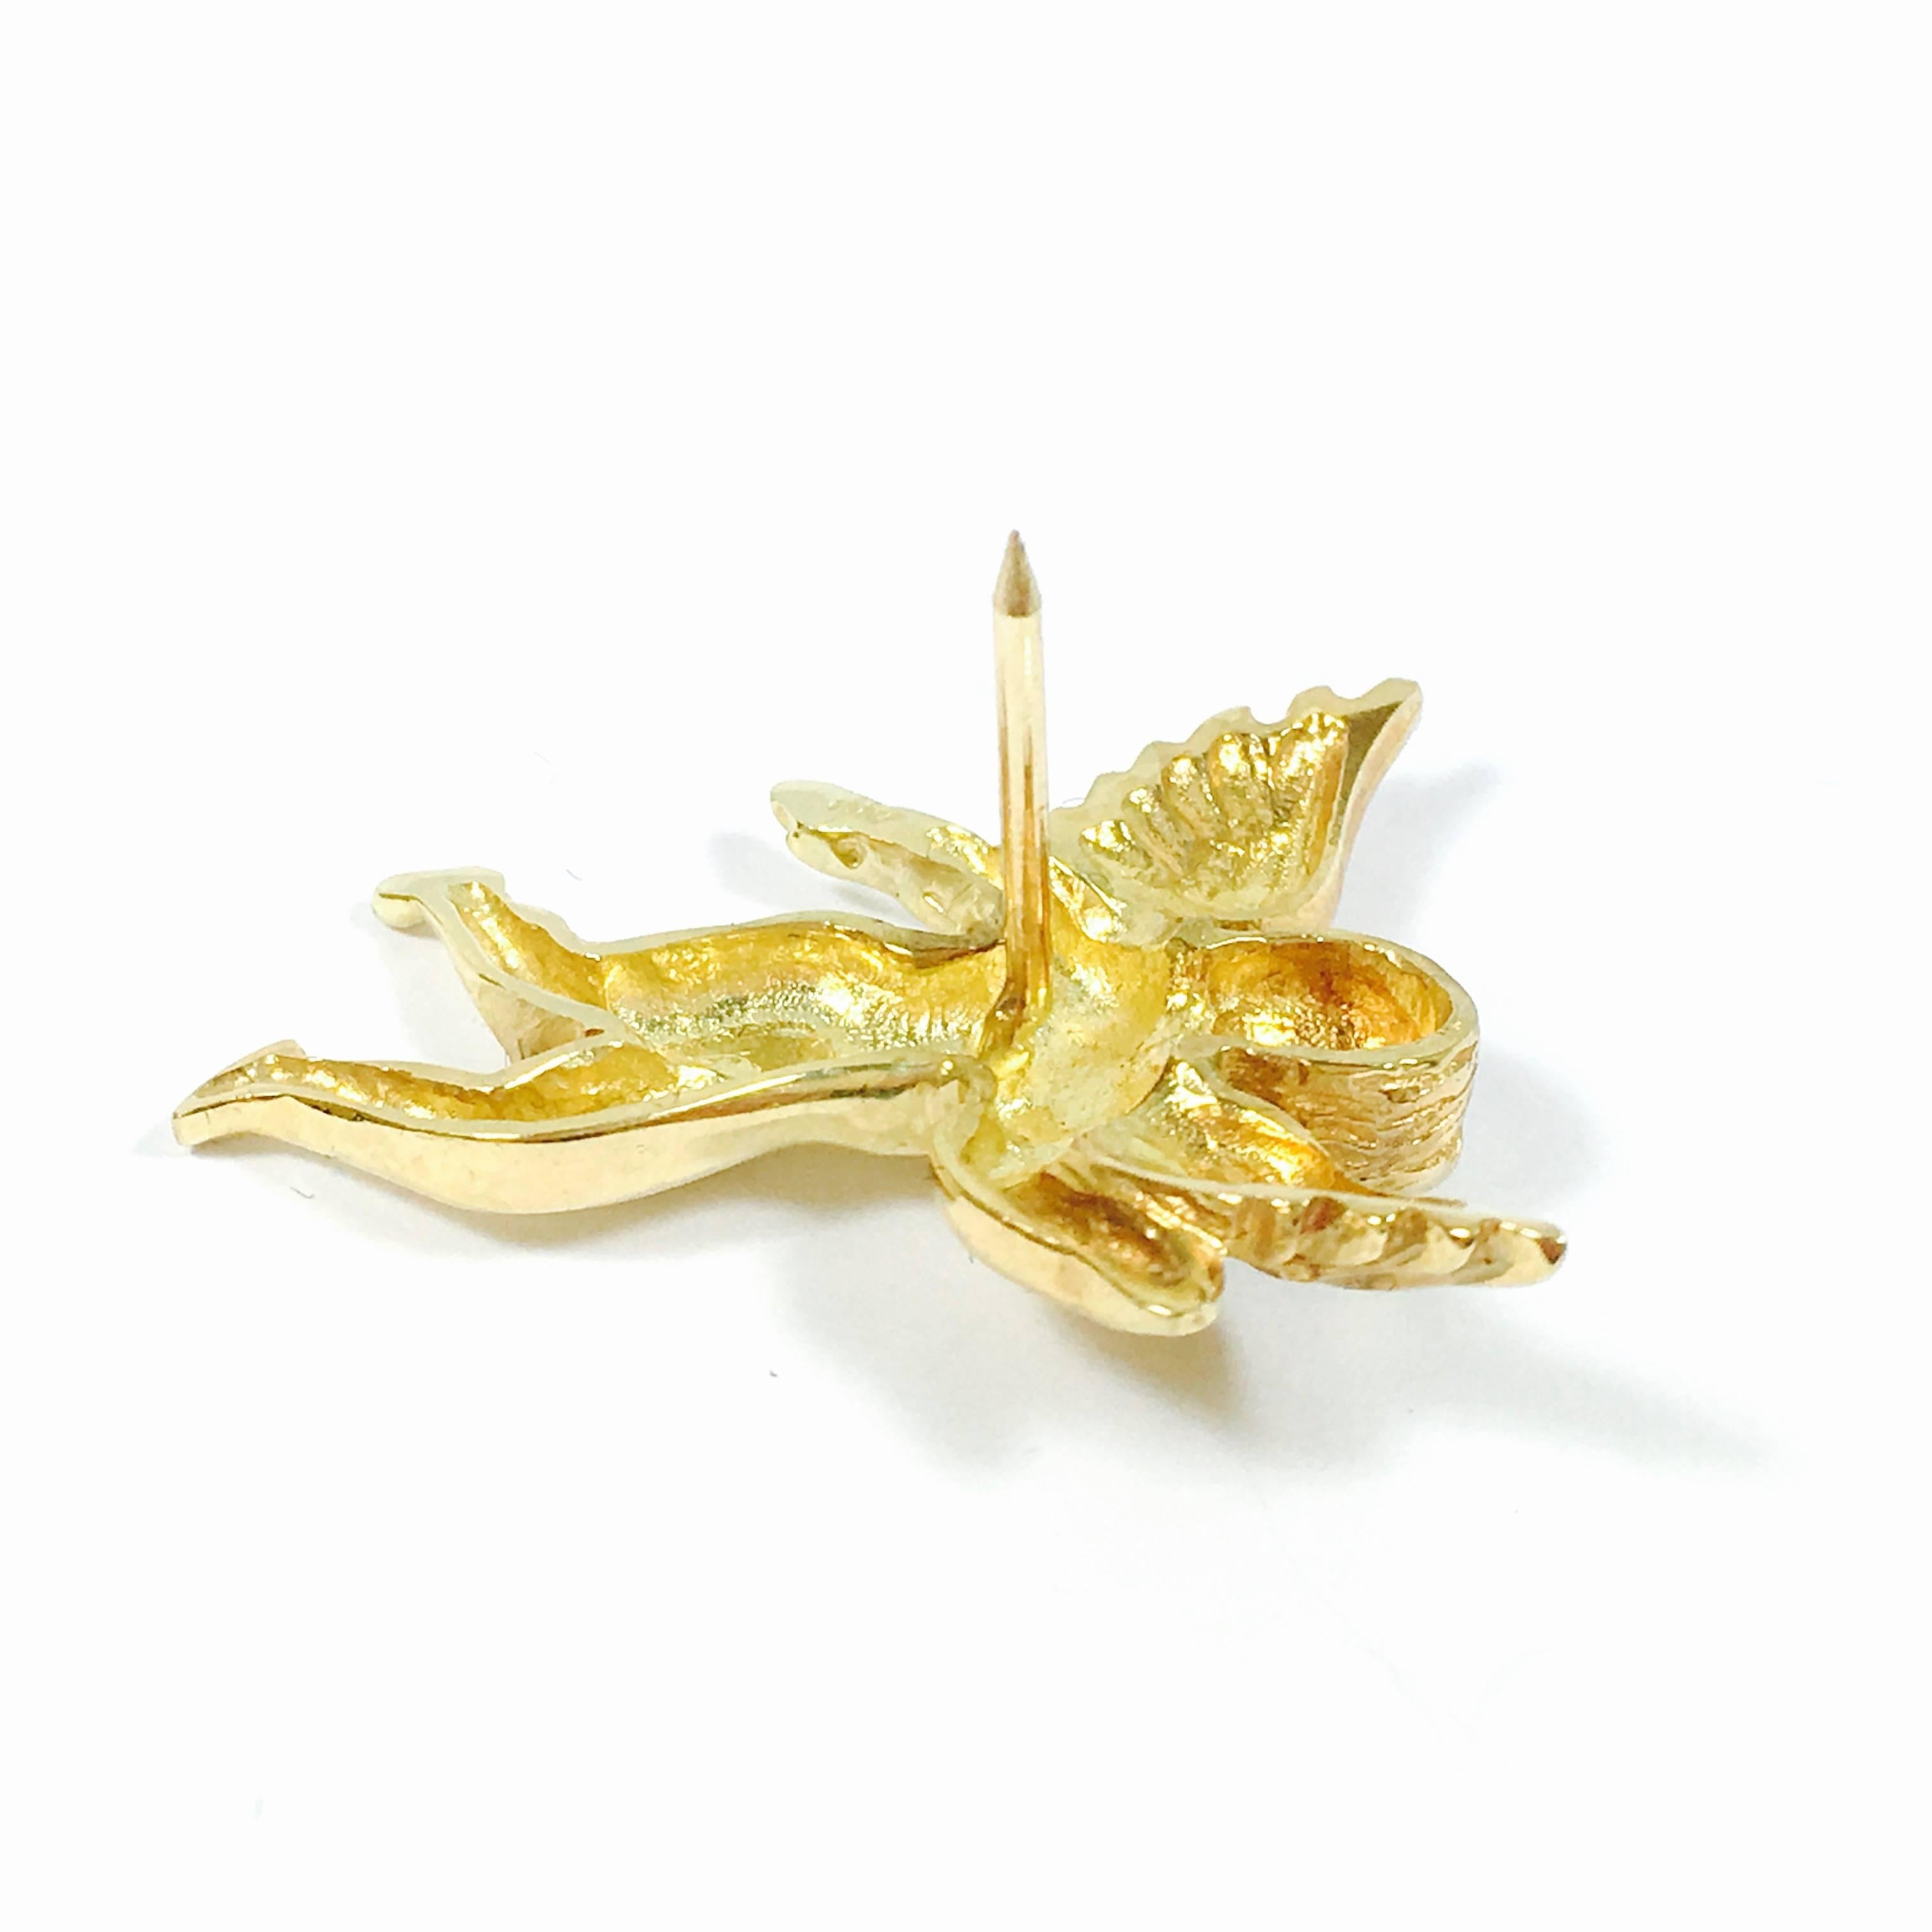 14K yellow gold angel tie pin form circa 1950's. 
Measurements: 30 x 26 mm
Weight: 6.2 grams
